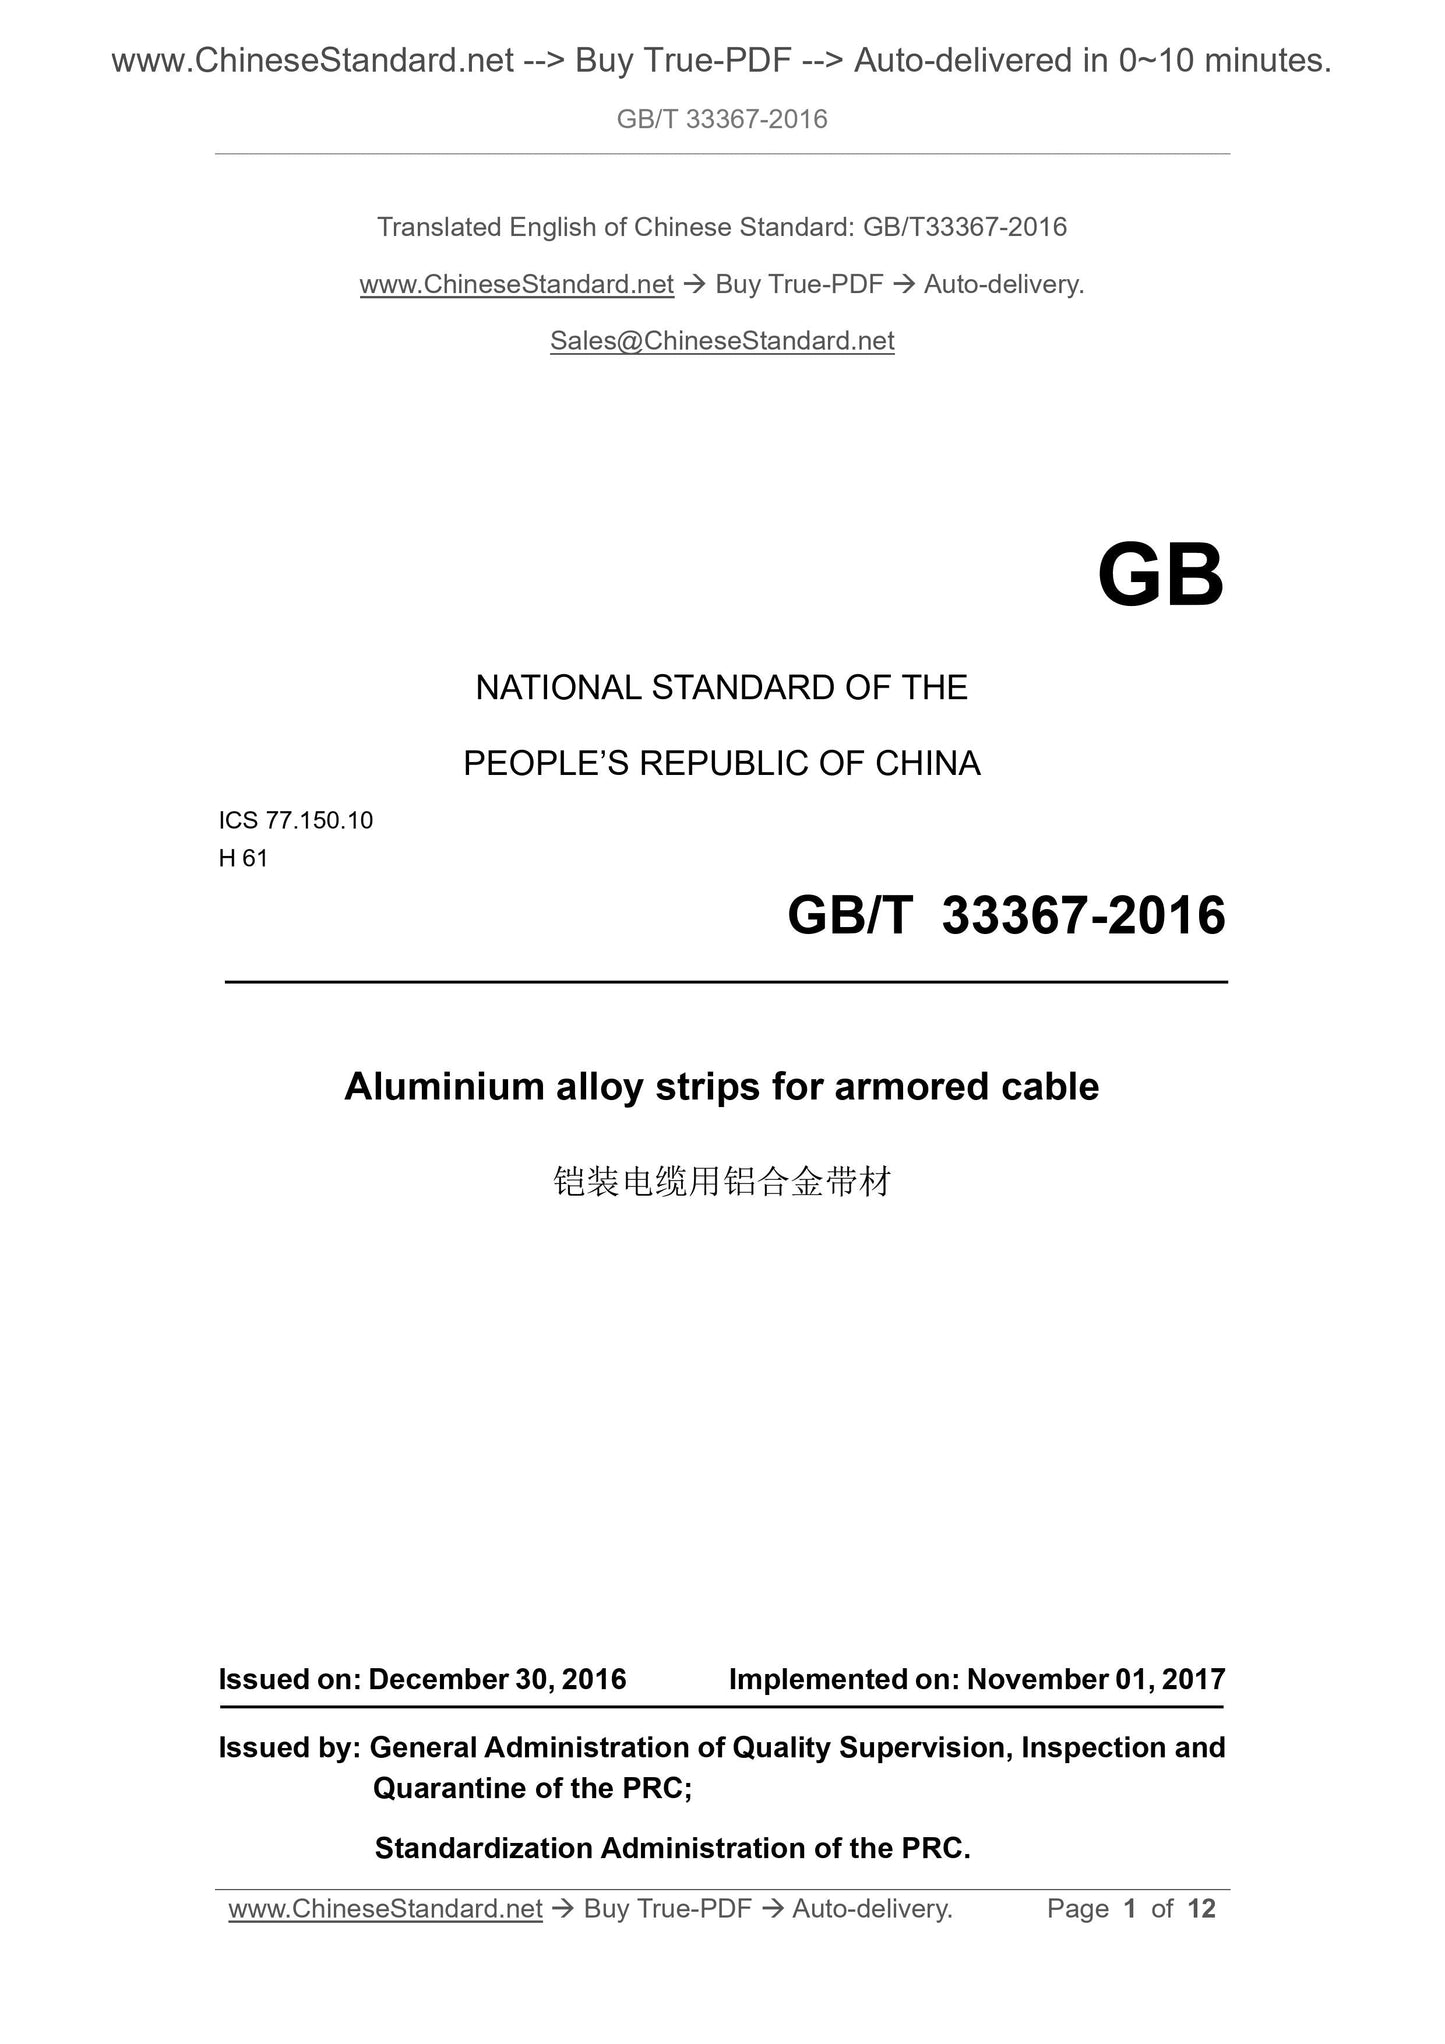 GB/T 33367-2016 Page 1